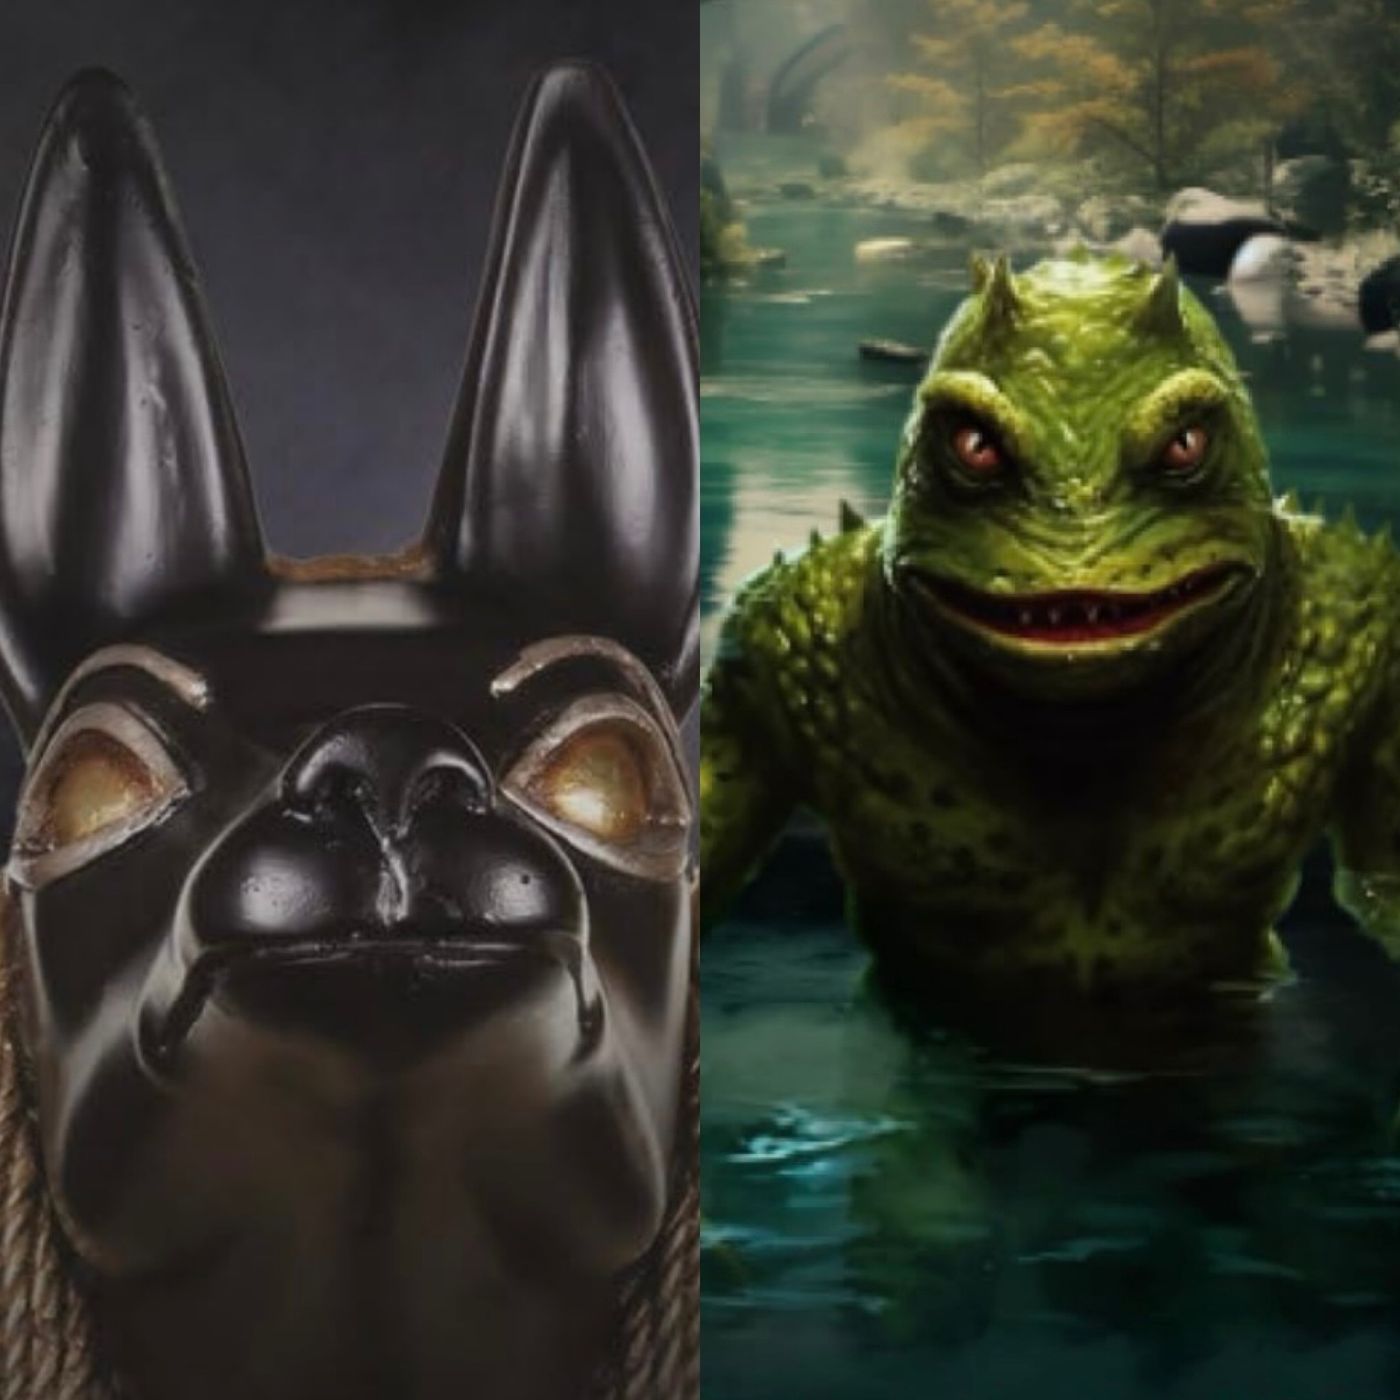 Ep. 53: Anubis Chronicles & Frogman of the Foothills